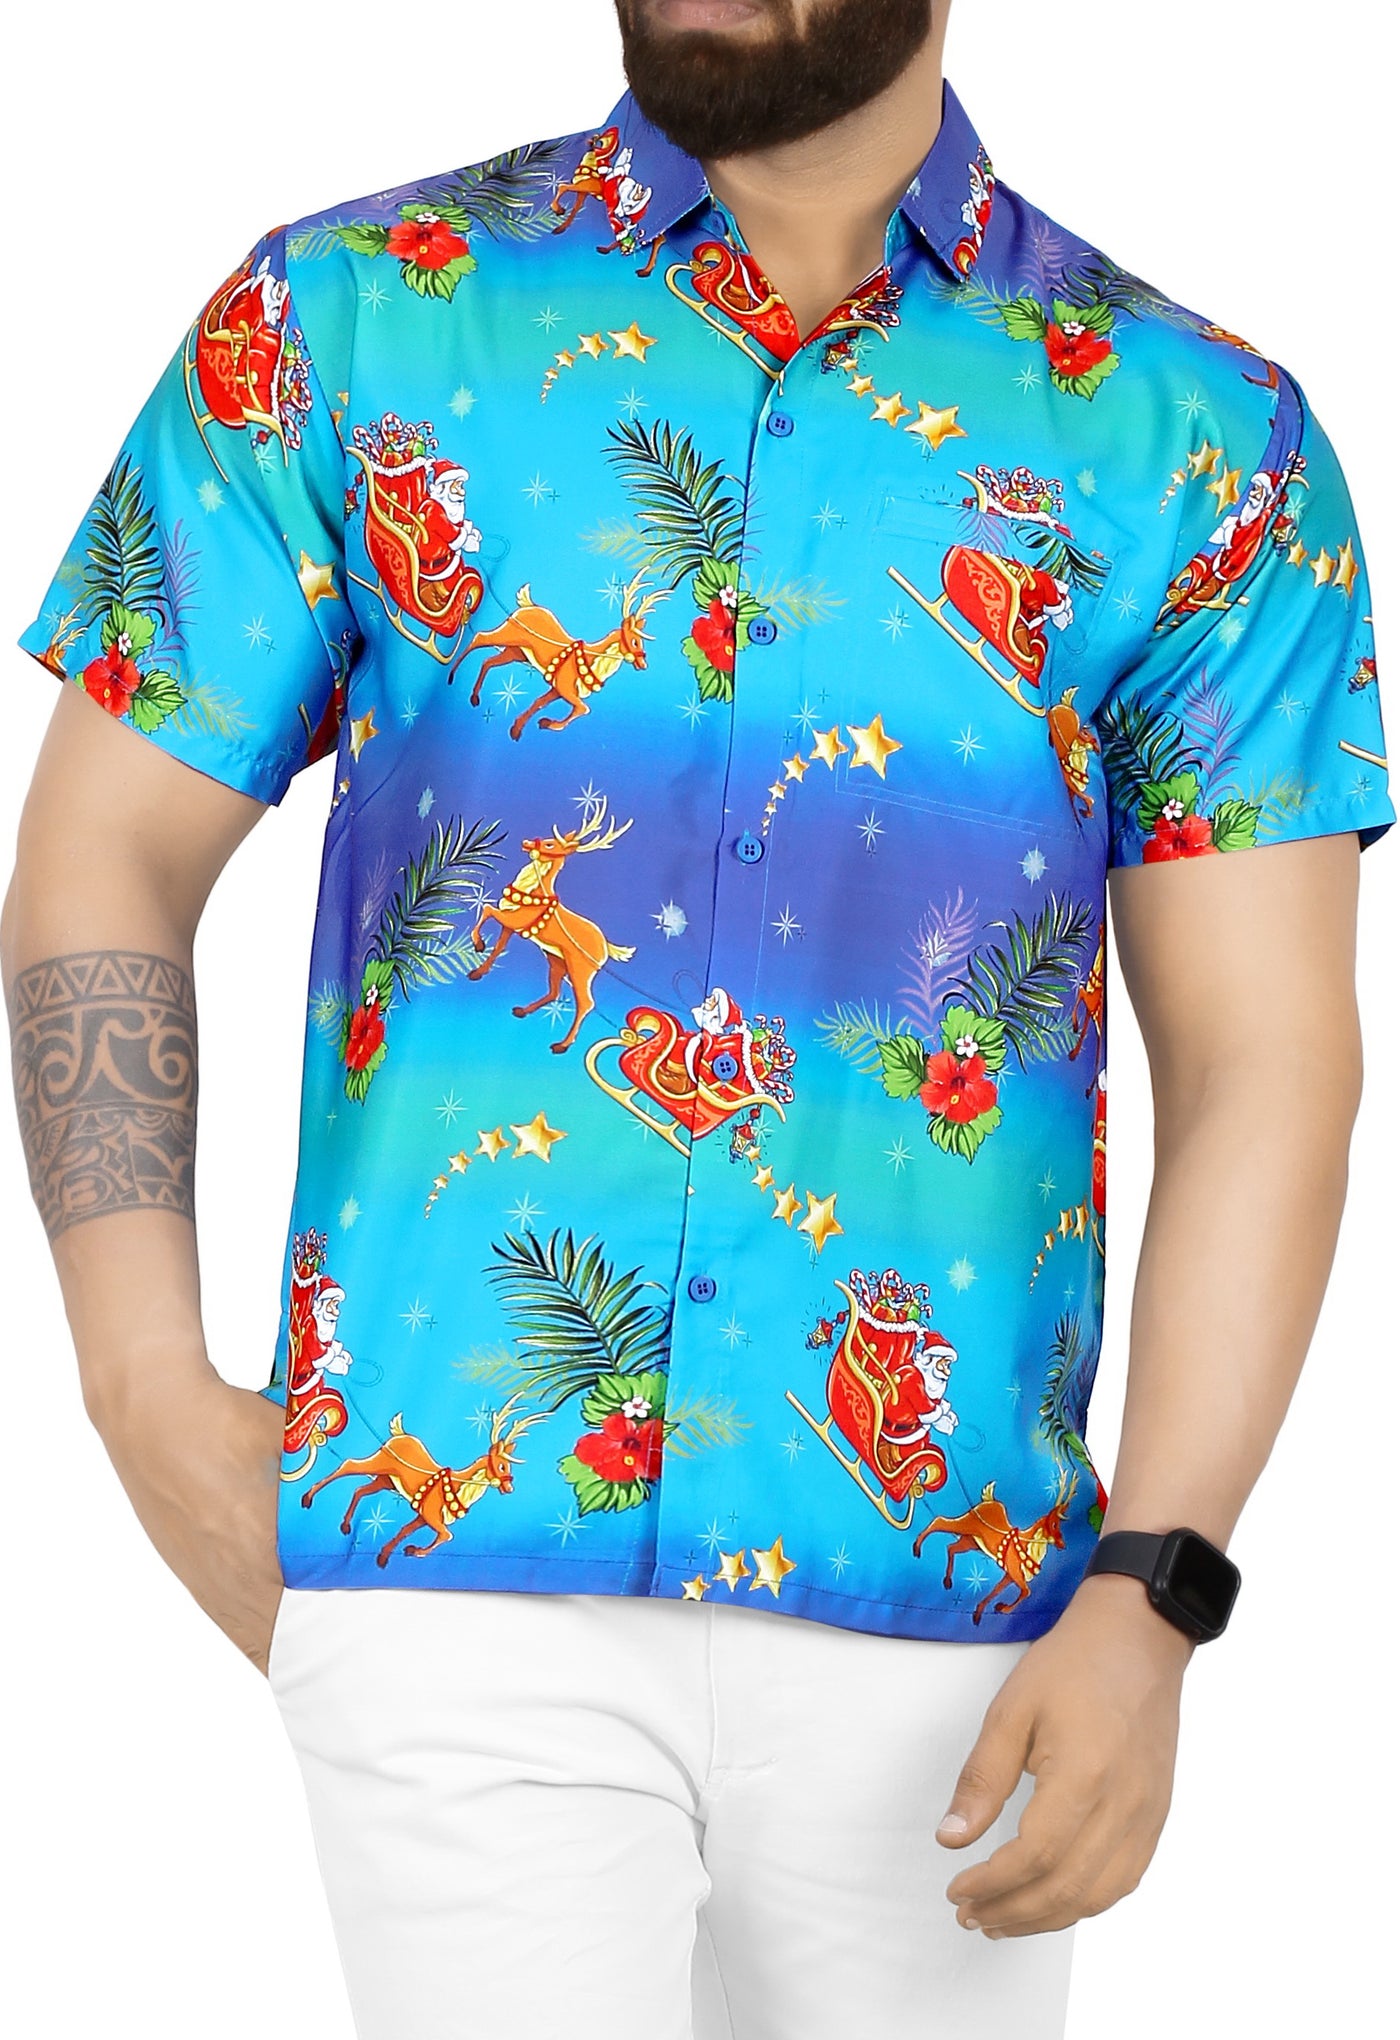 Santa's Sleigh and Hibiscus Delight Shirt For men